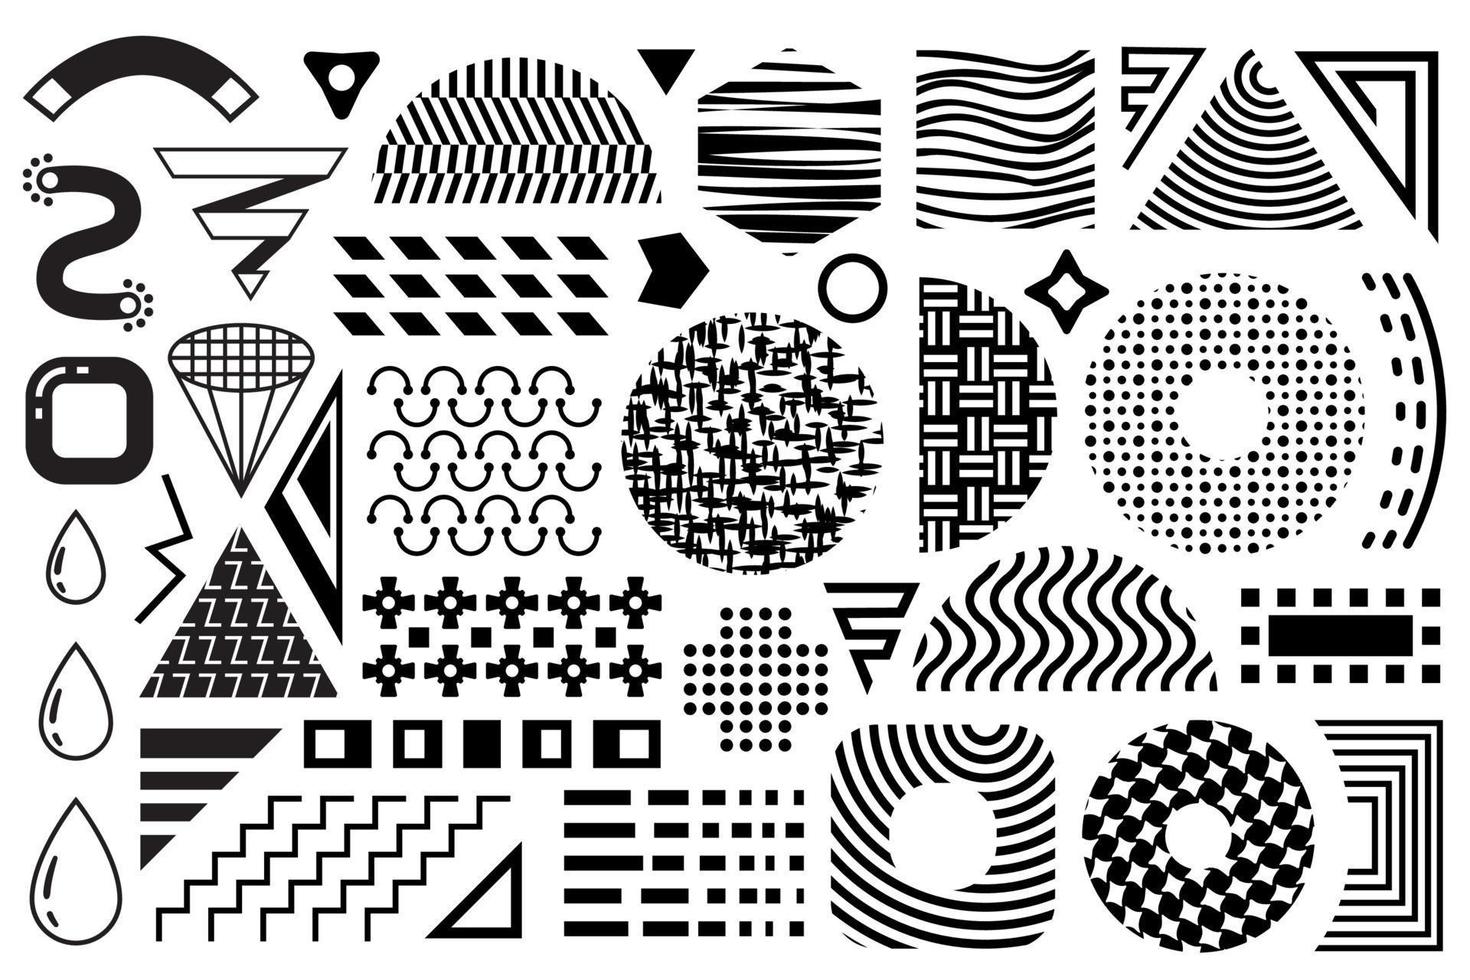 Black and white vector Memphis set. Collection of 90's Memphis geometric design elements. Halftones, stripes, geometric flat patterns, abstract shapes isolated on white background.